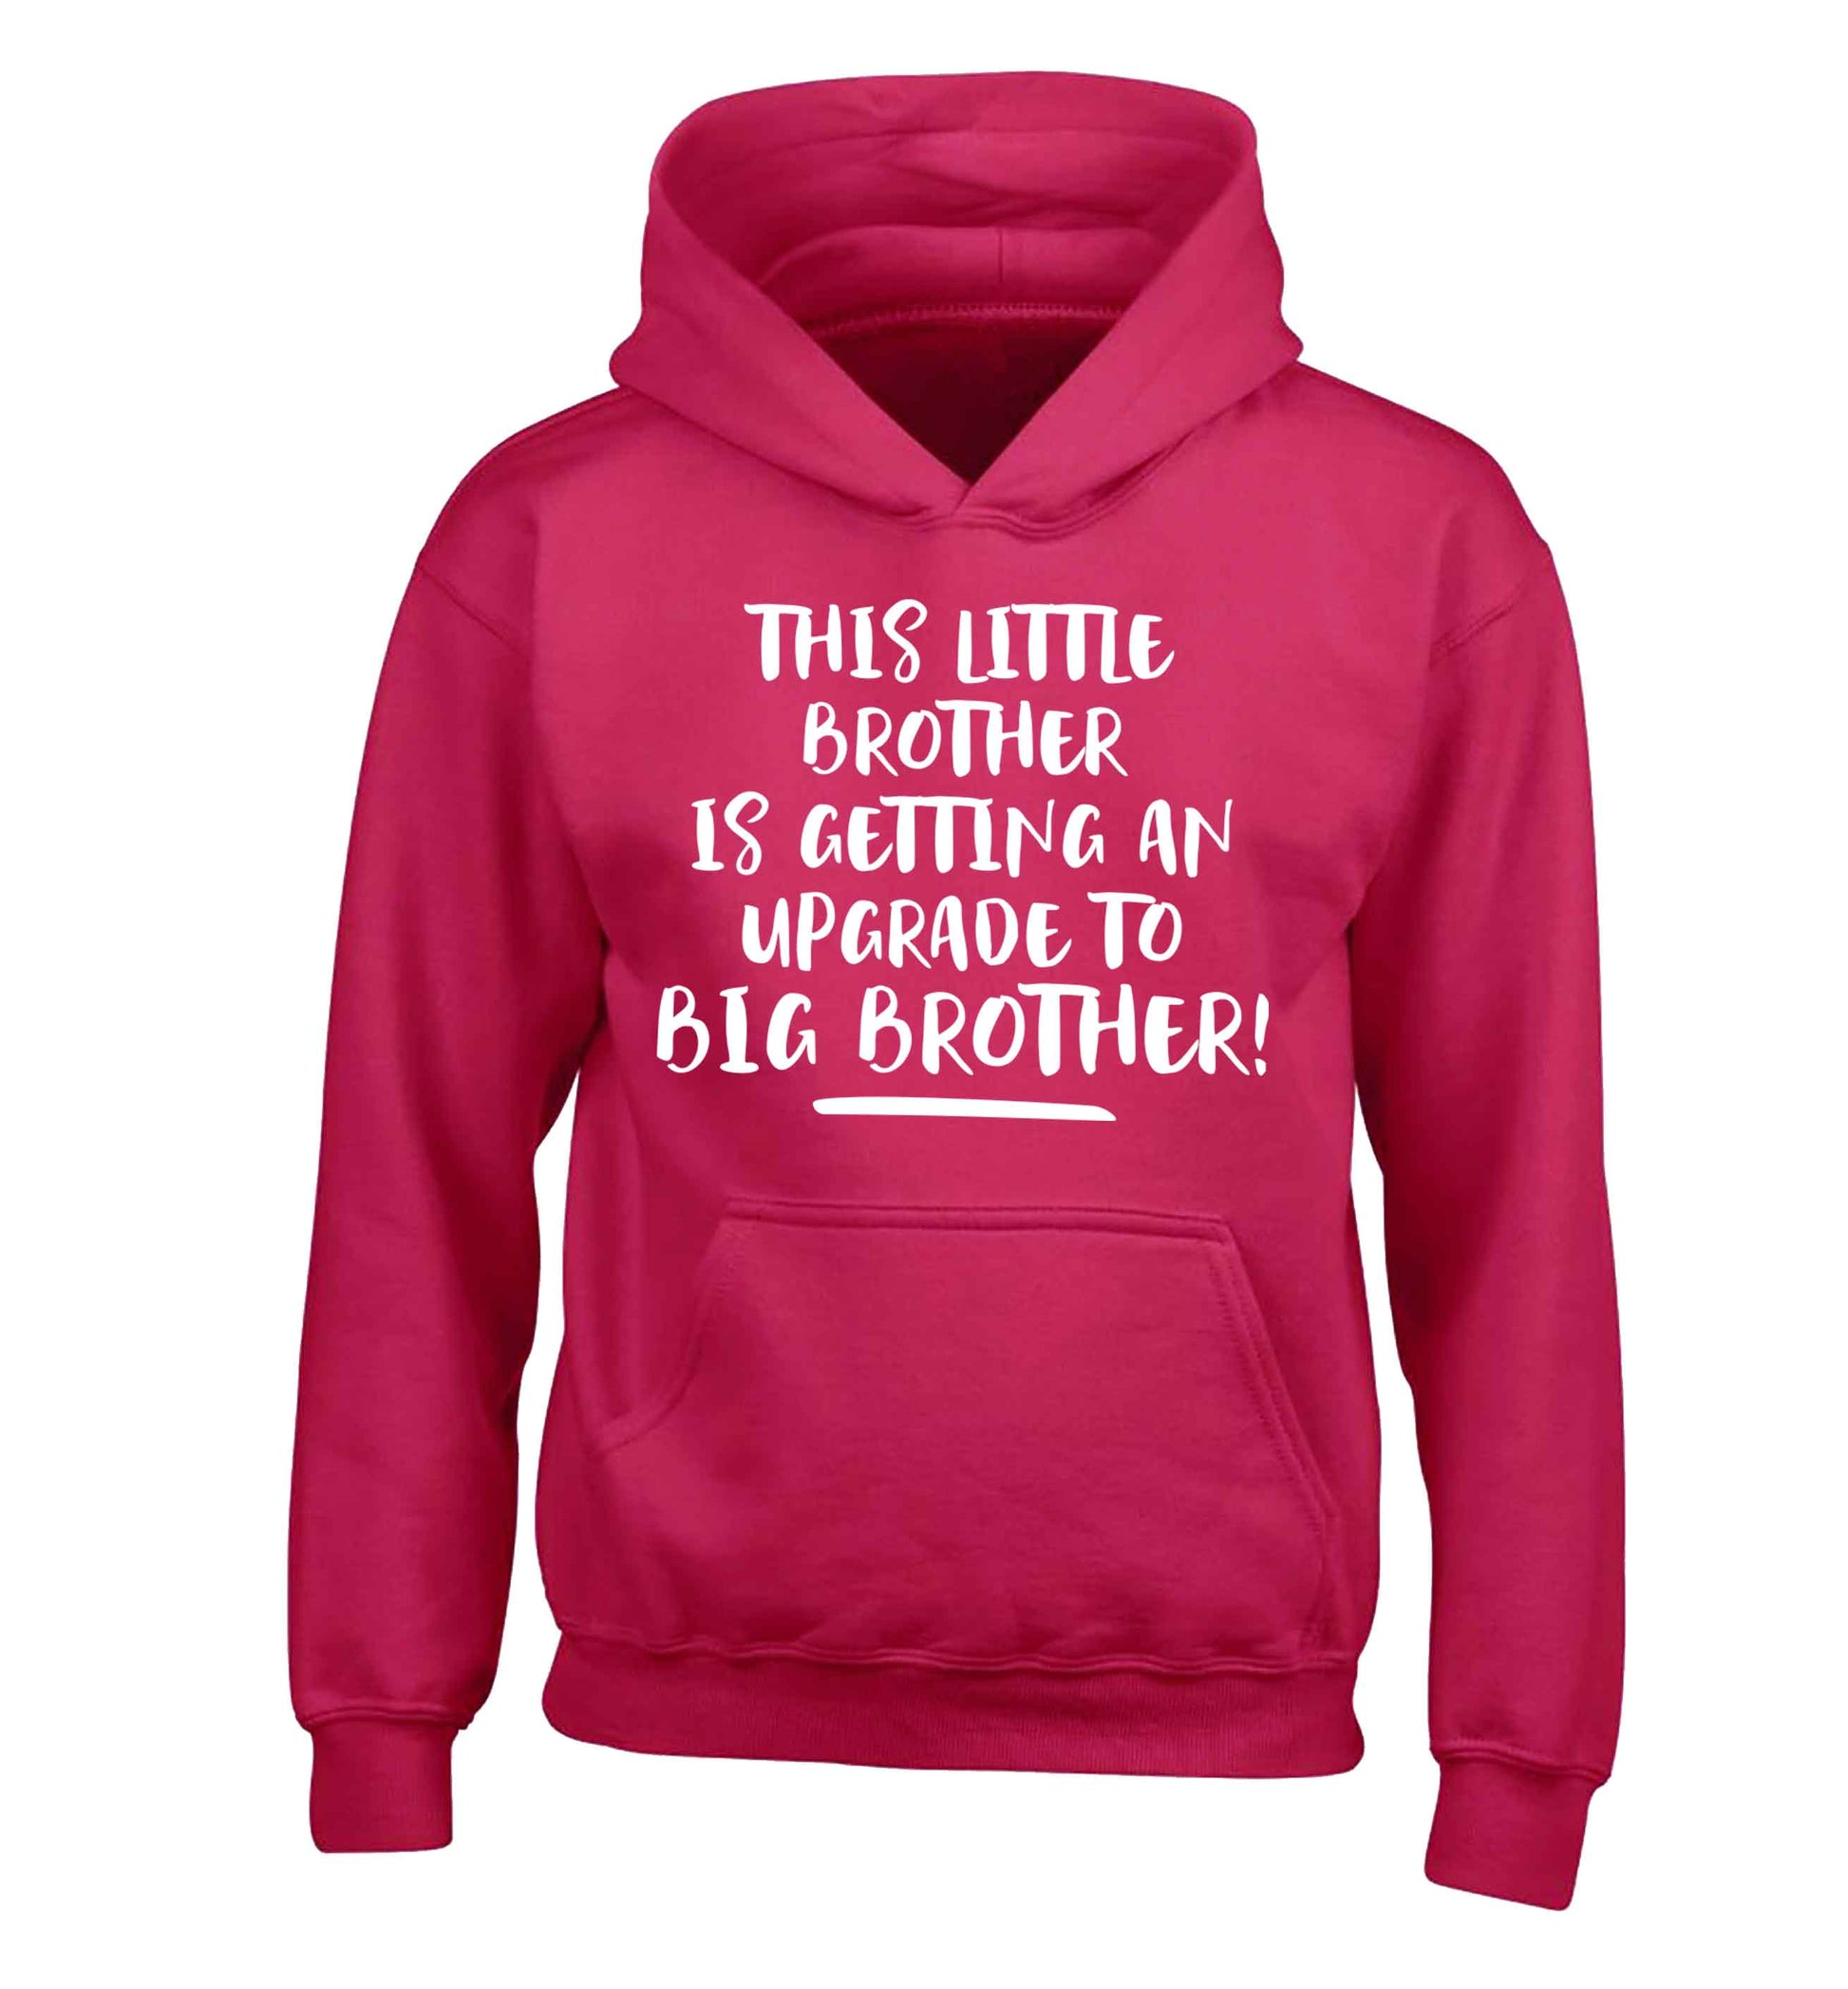 This little brother is getting an upgrade to big brother! children's pink hoodie 12-13 Years